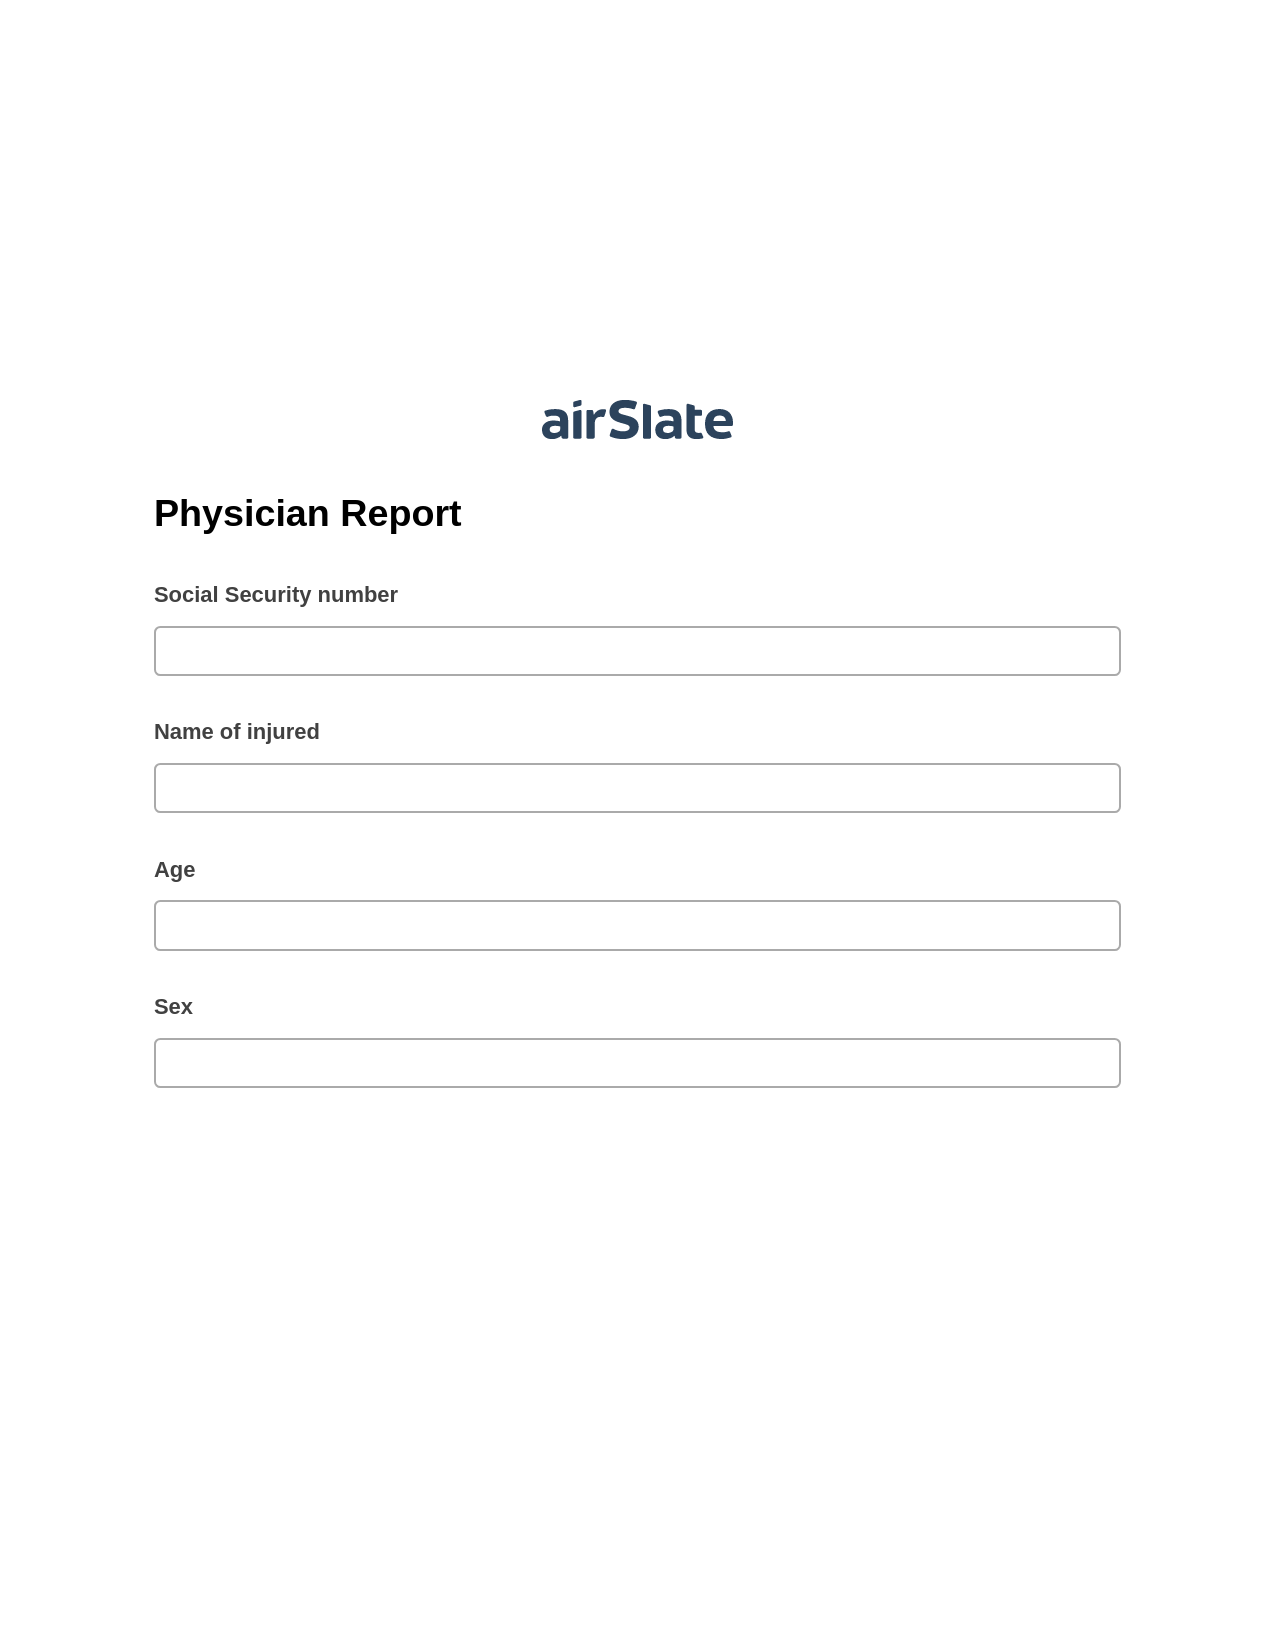 Physician Report Pre-fill Dropdowns from CSV file Bot, Export to MS Dynamics 365 Bot, Post-finish Document Bot